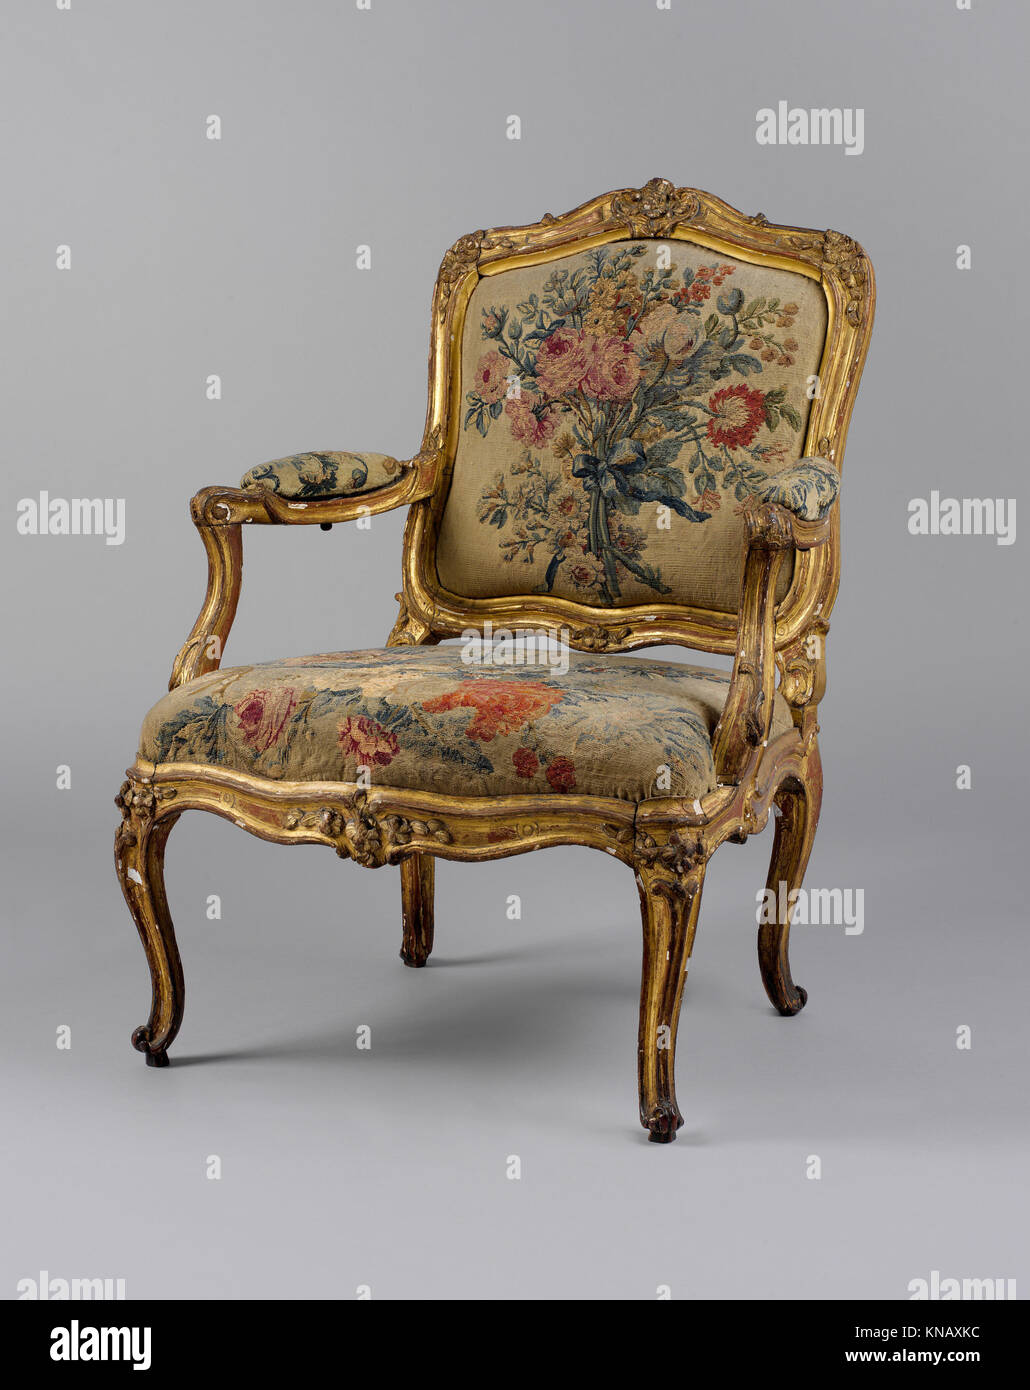 Armchair (fauteuil) MET DP130343 189343 Factory: Tapestry woven at Beauvais, Armchair (fauteuil), first half 18th century, Carved and gilded beechwood; Beauvais tapestry upholstery, Overall: 36 1/4 ? 27 ? 21 3/4 in. (92.1 ? 68.6 ? 55.2 cm). The Metropolitan Museum of Art, New York. Gift of J. Pierpont Morgan, 1906 (07.225.58) Stock Photo